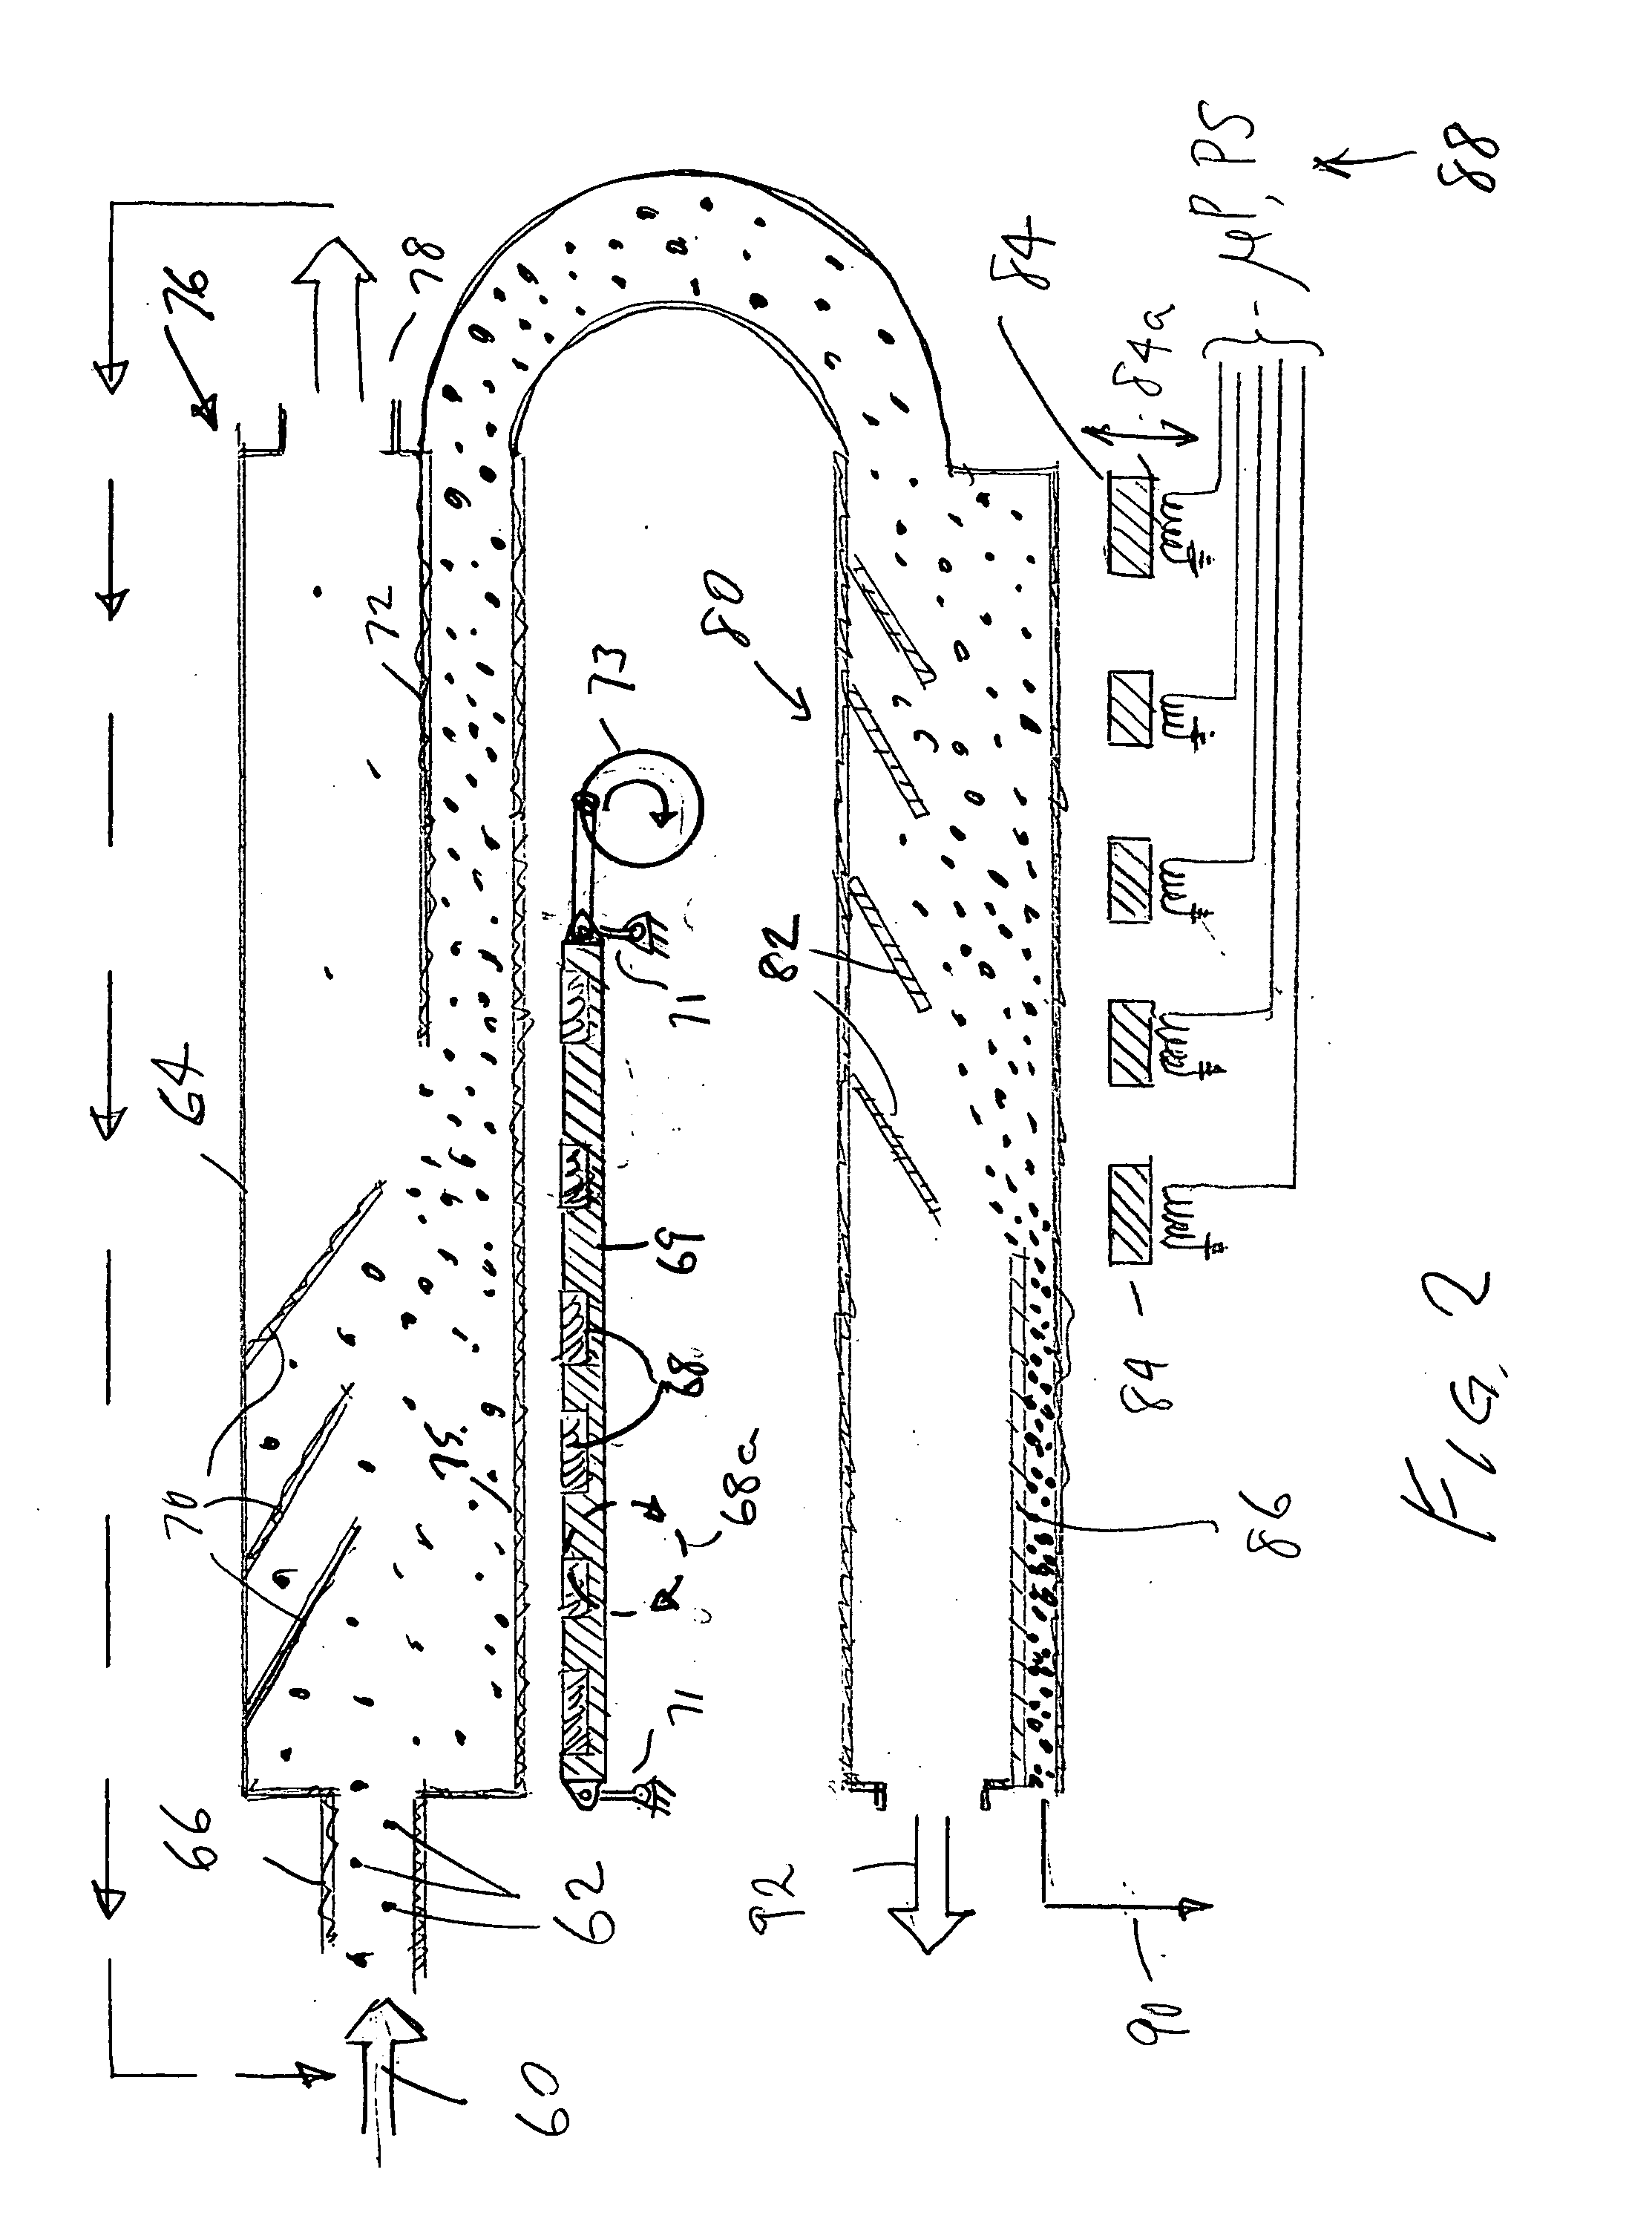 Water treatment using magnetic and other field separation technologies